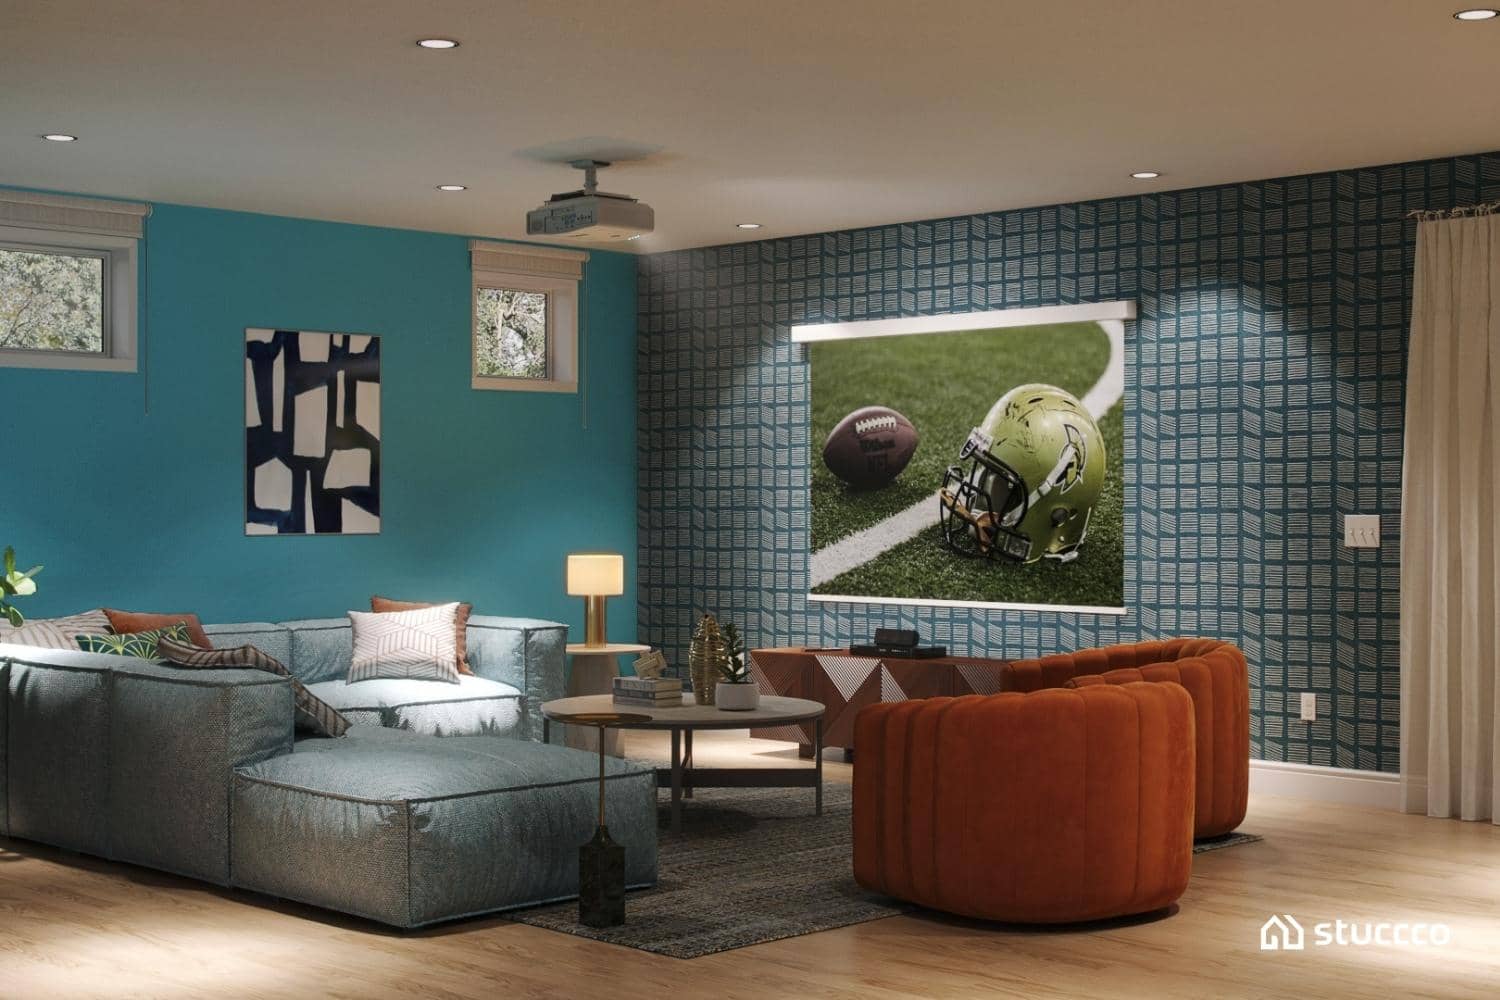 Example living room with wall paper, colorful design